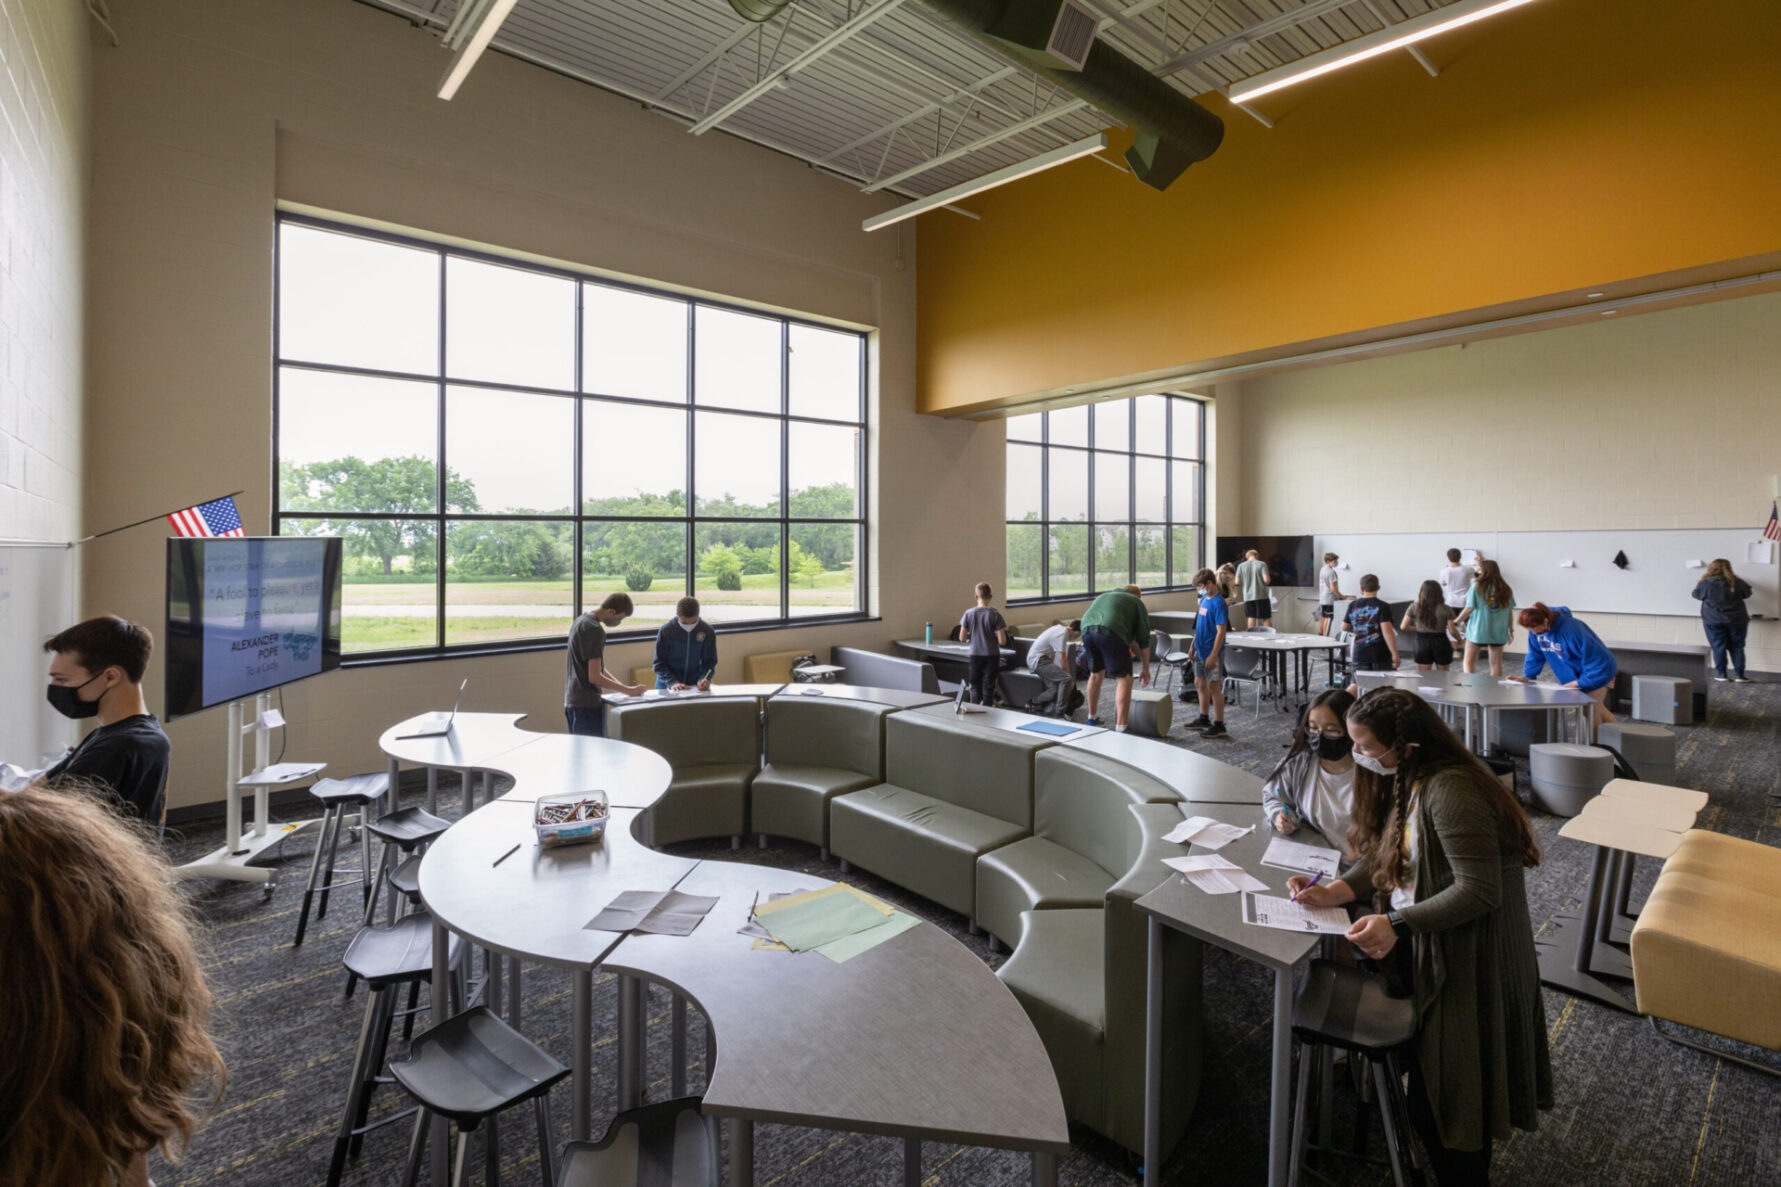 Students learning in a classroom at Basehor Linwood Middle School, built by McCownGordon